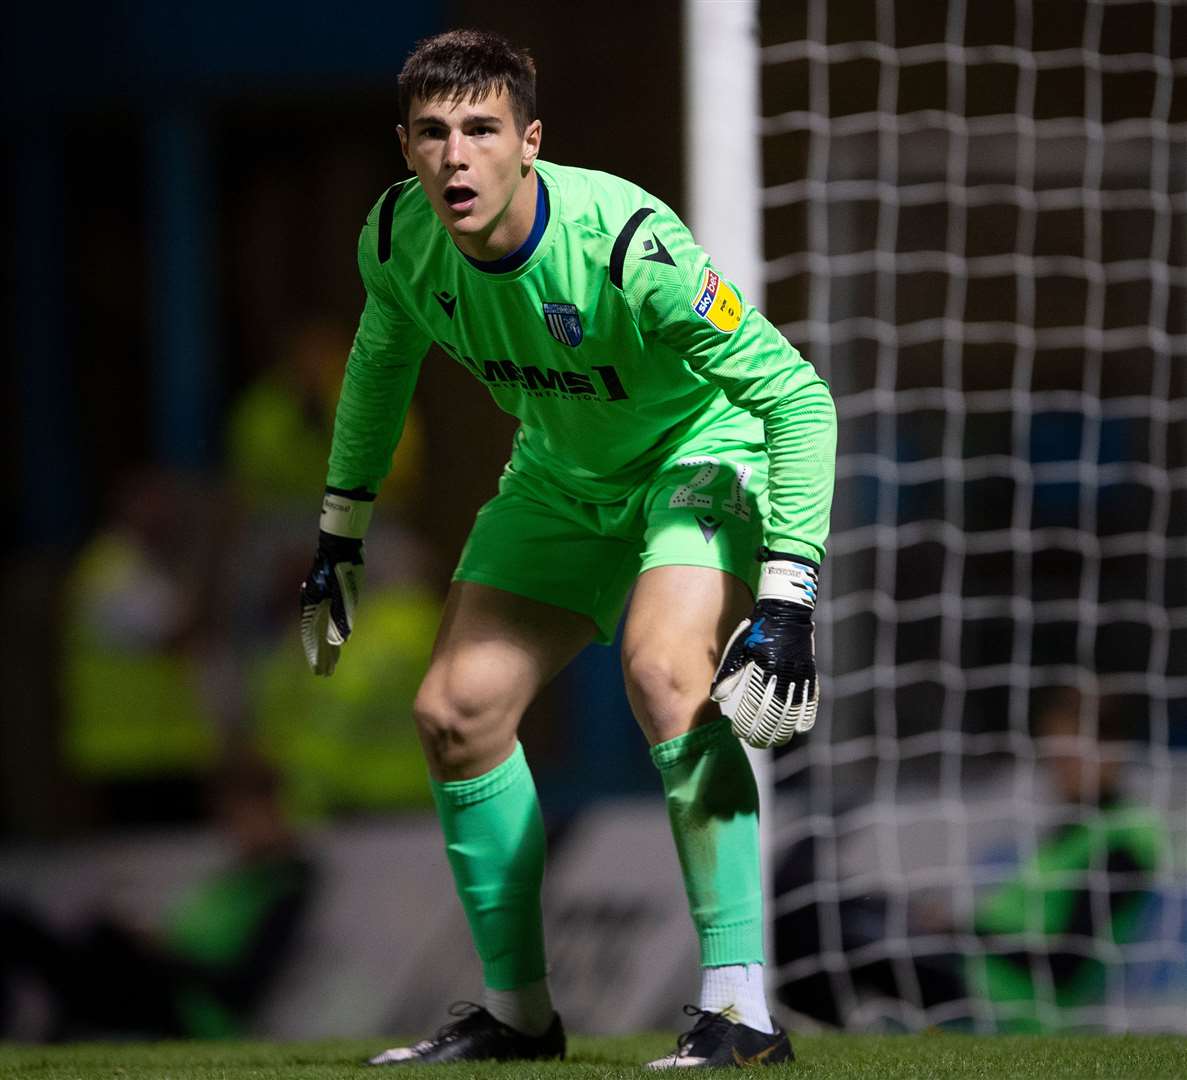 Gillingham goalkeeper Joe Walsh left out on Tuesday over Covid-19 fears